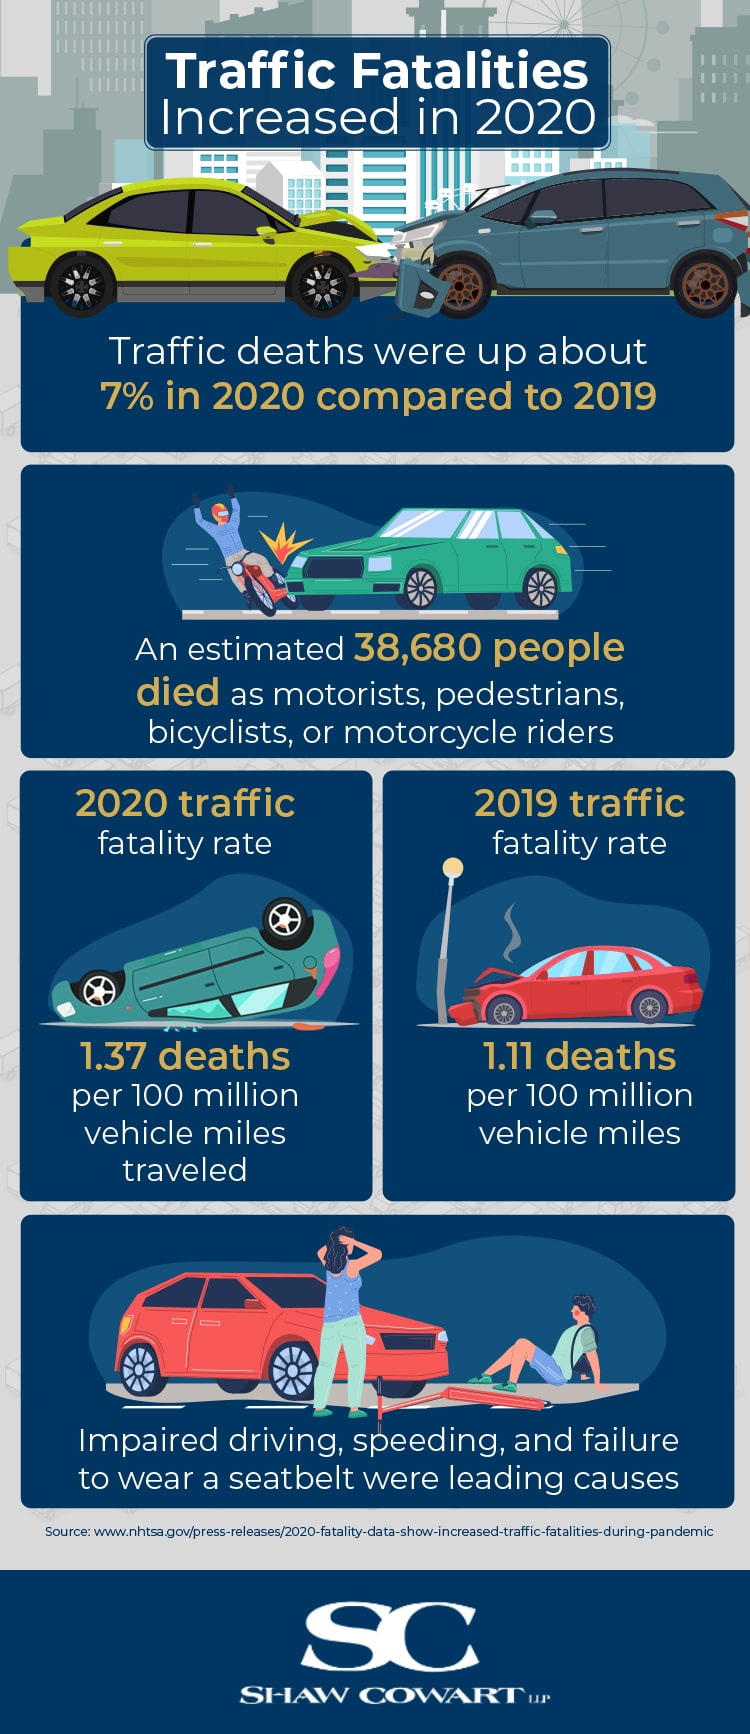 An infographic discussing that traffic fatalities increased in 2020